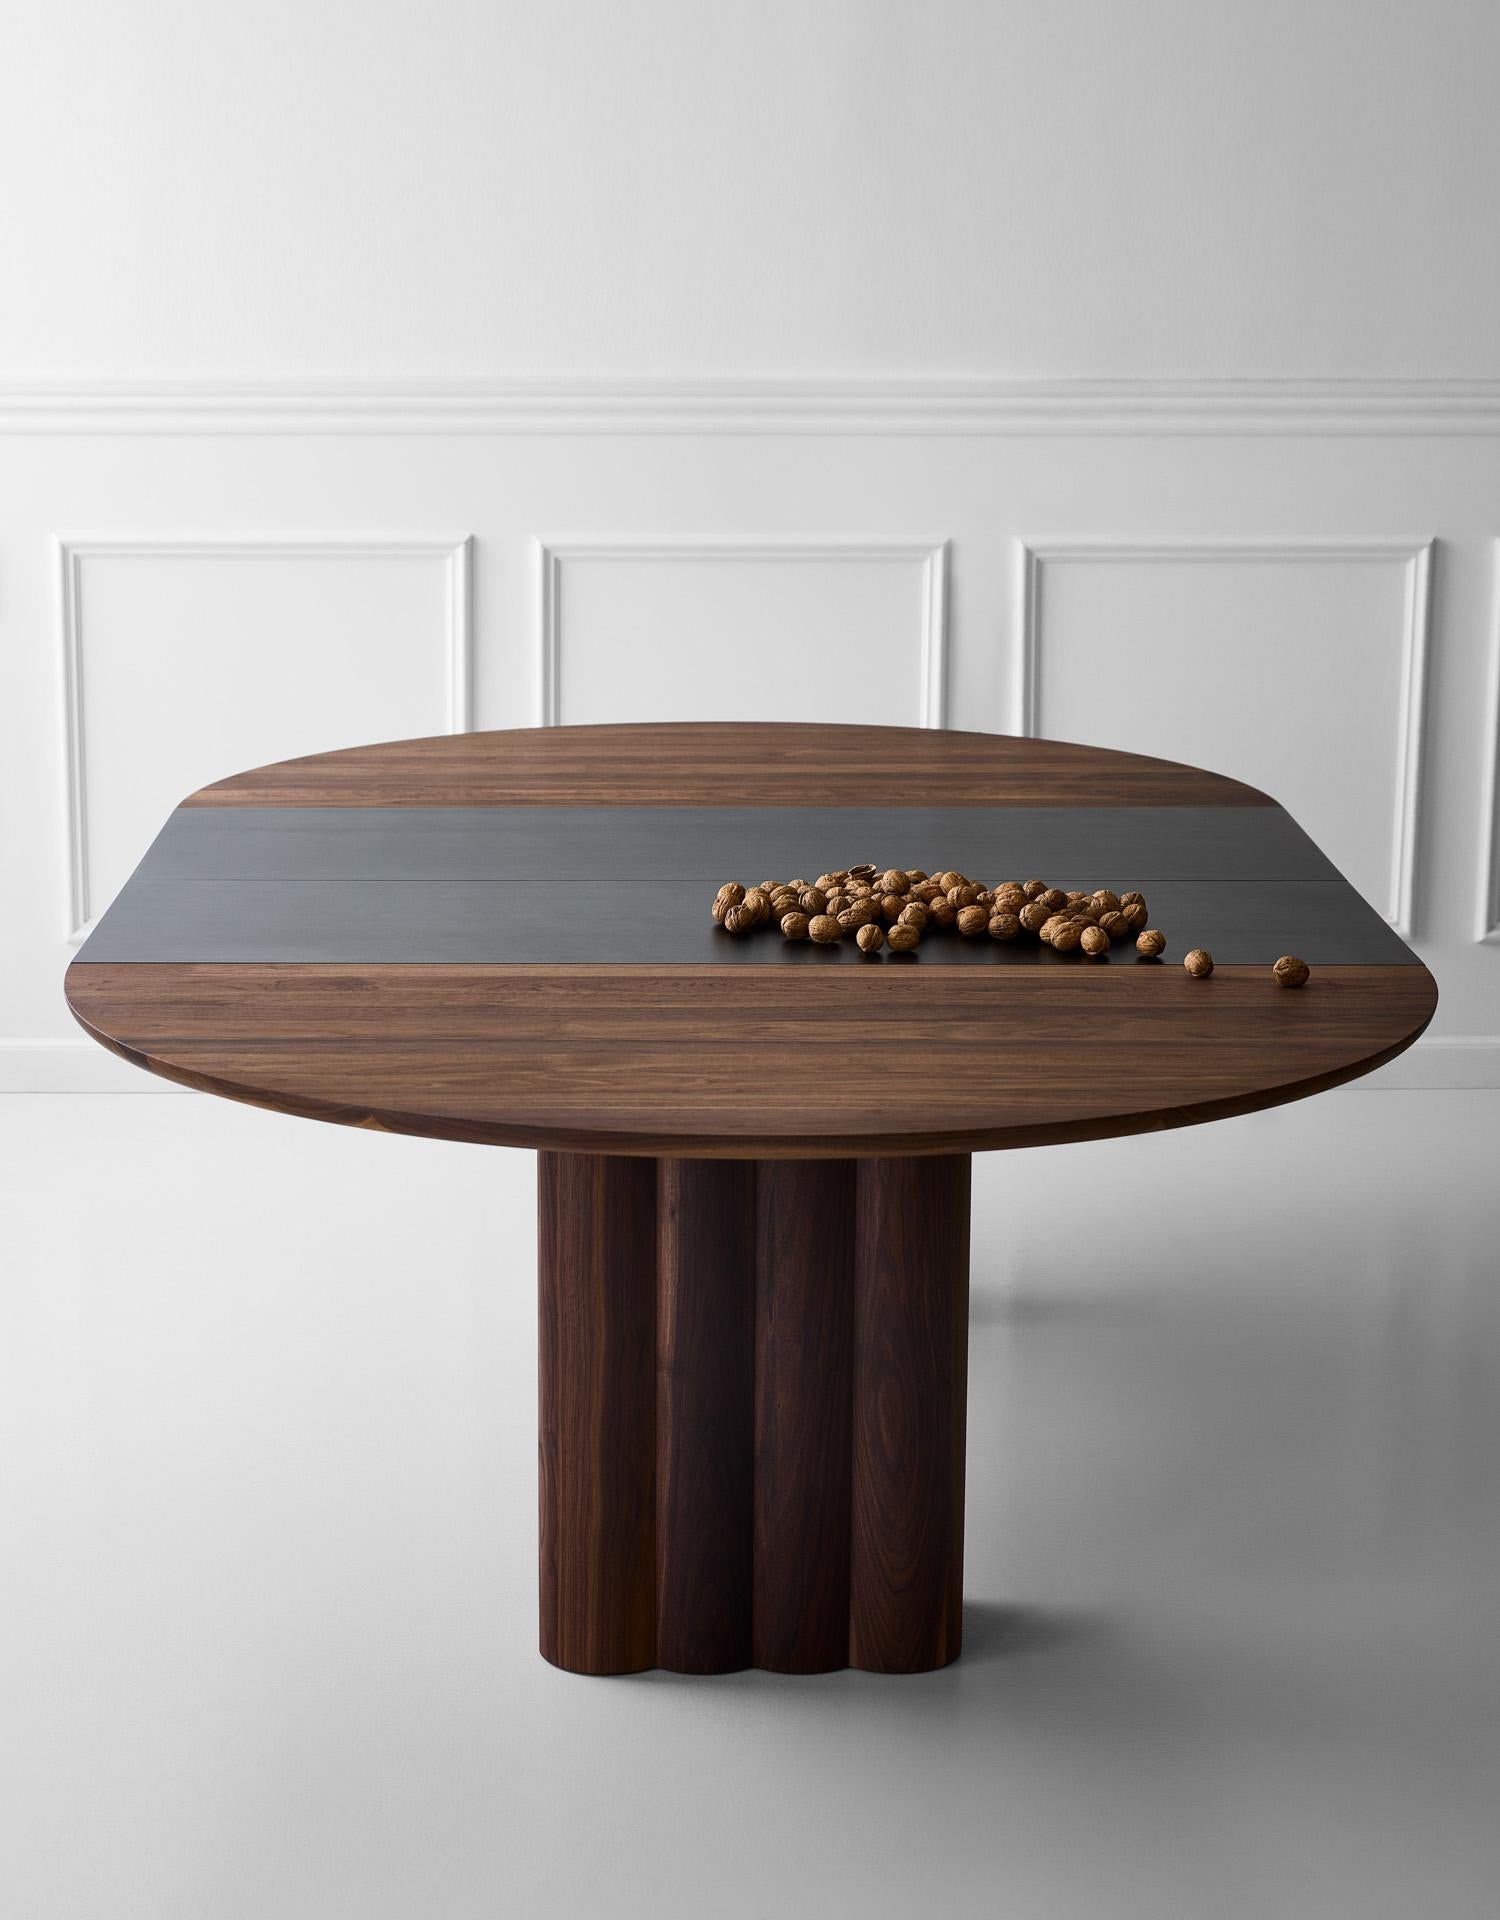 Scandinavian Modern Round Dining Table 'Plush' by Dk3, Smoked Oak or Walnut, 160 cm For Sale